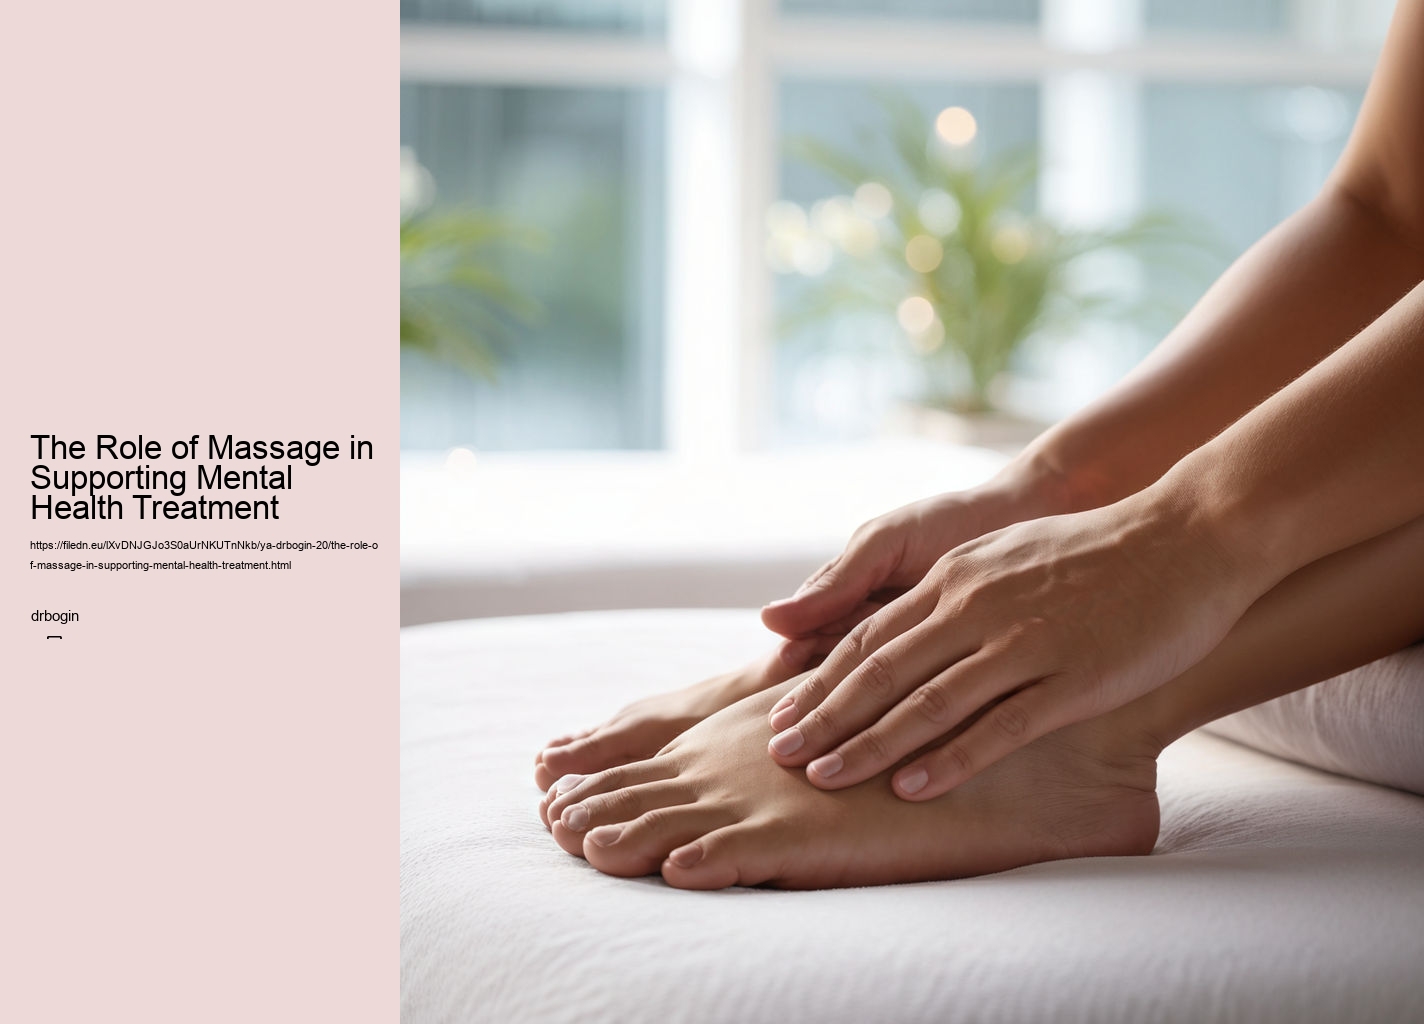 The Role of Massage in Supporting Mental Health Treatment